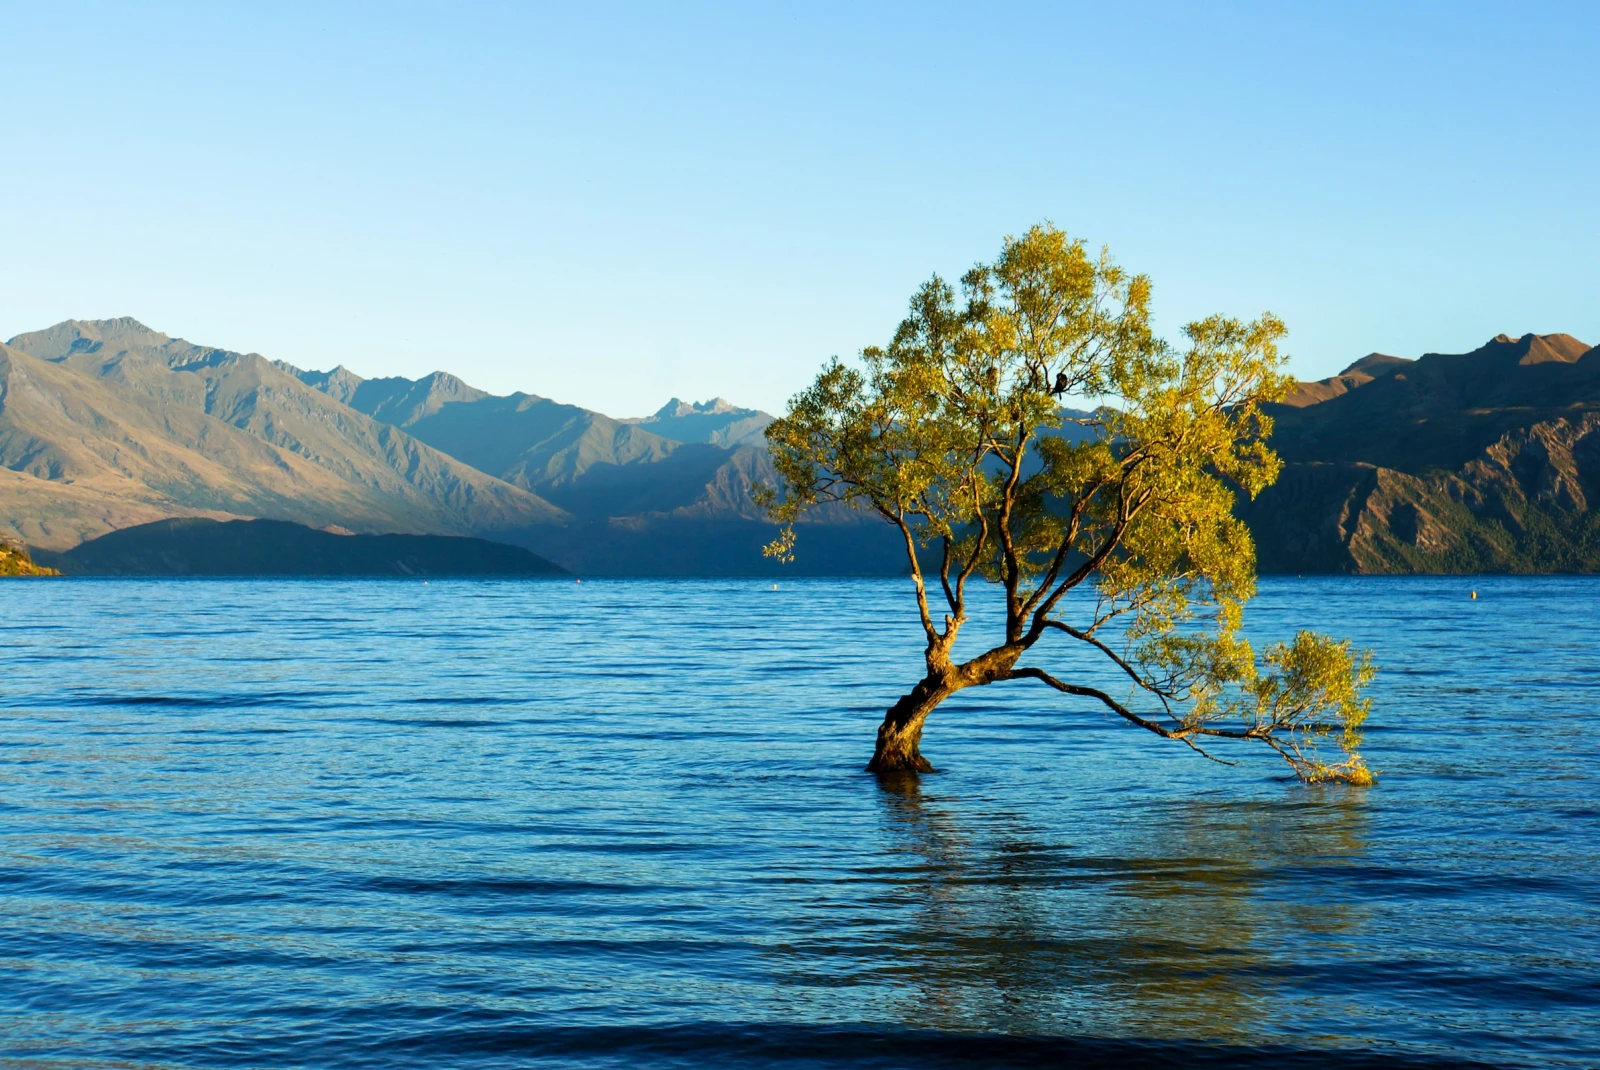 Lake Wanaka is a serene jewel set against the backdrop of New Zealand's Southern Alps, inviting visitors to enjoy outdoor adventures and the tranquility of its pristine blue waters.